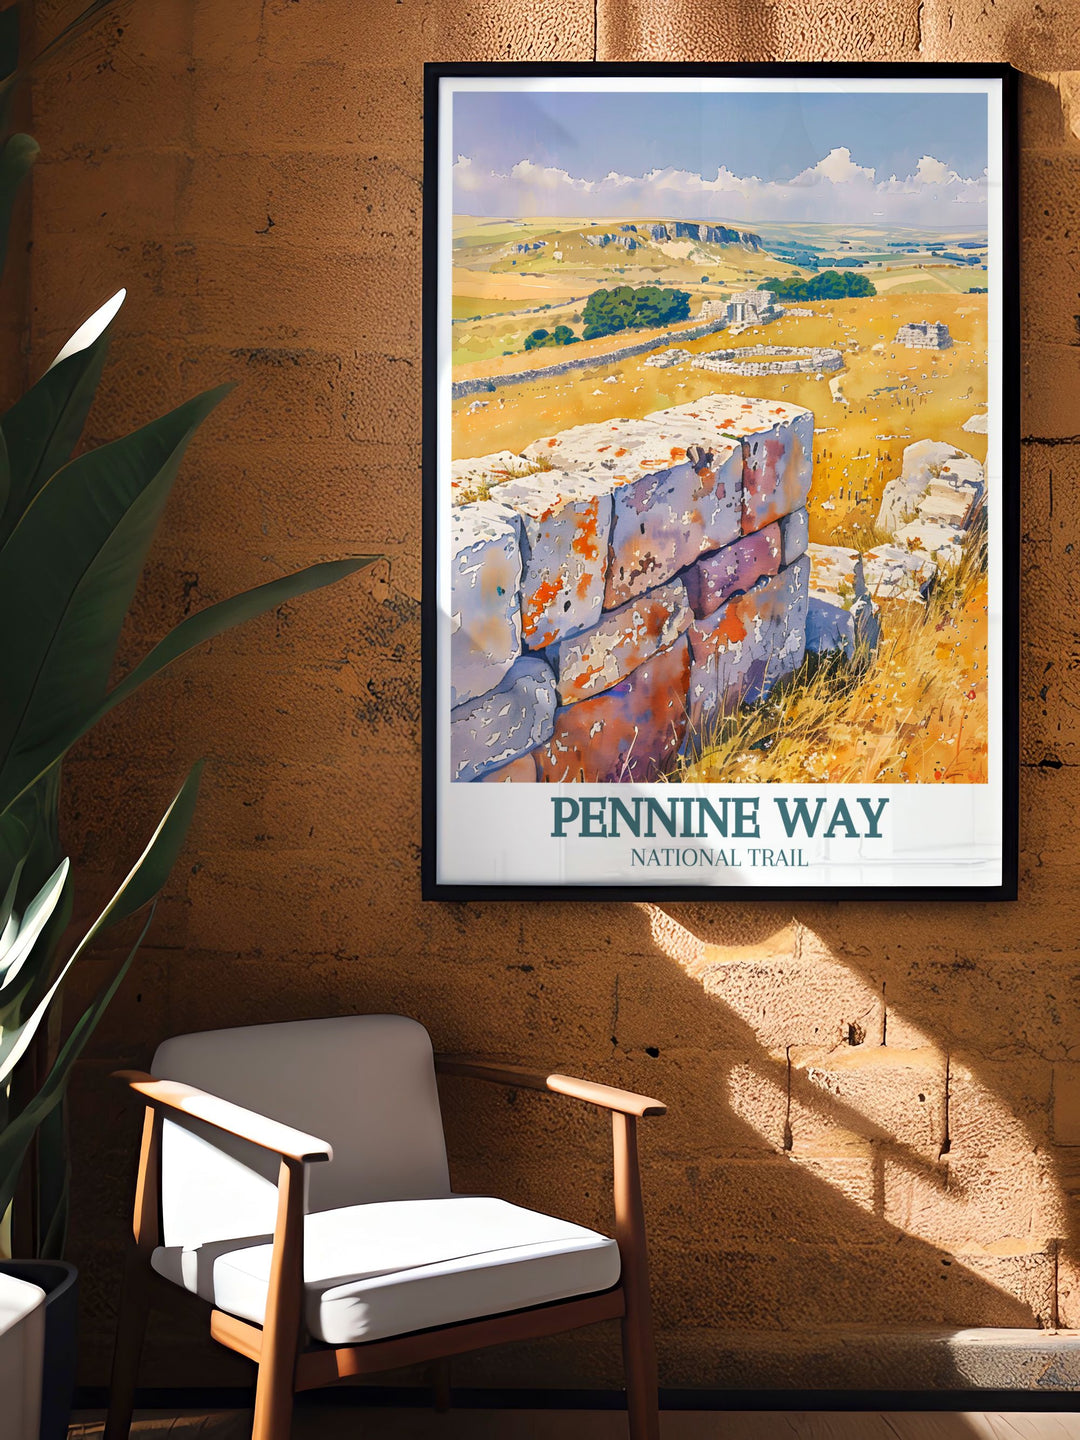 Pennine Way Print capturing the essence of the famous national trail across the Pennines an excellent gift for hiking enthusiasts and those who cherish outdoor adventures